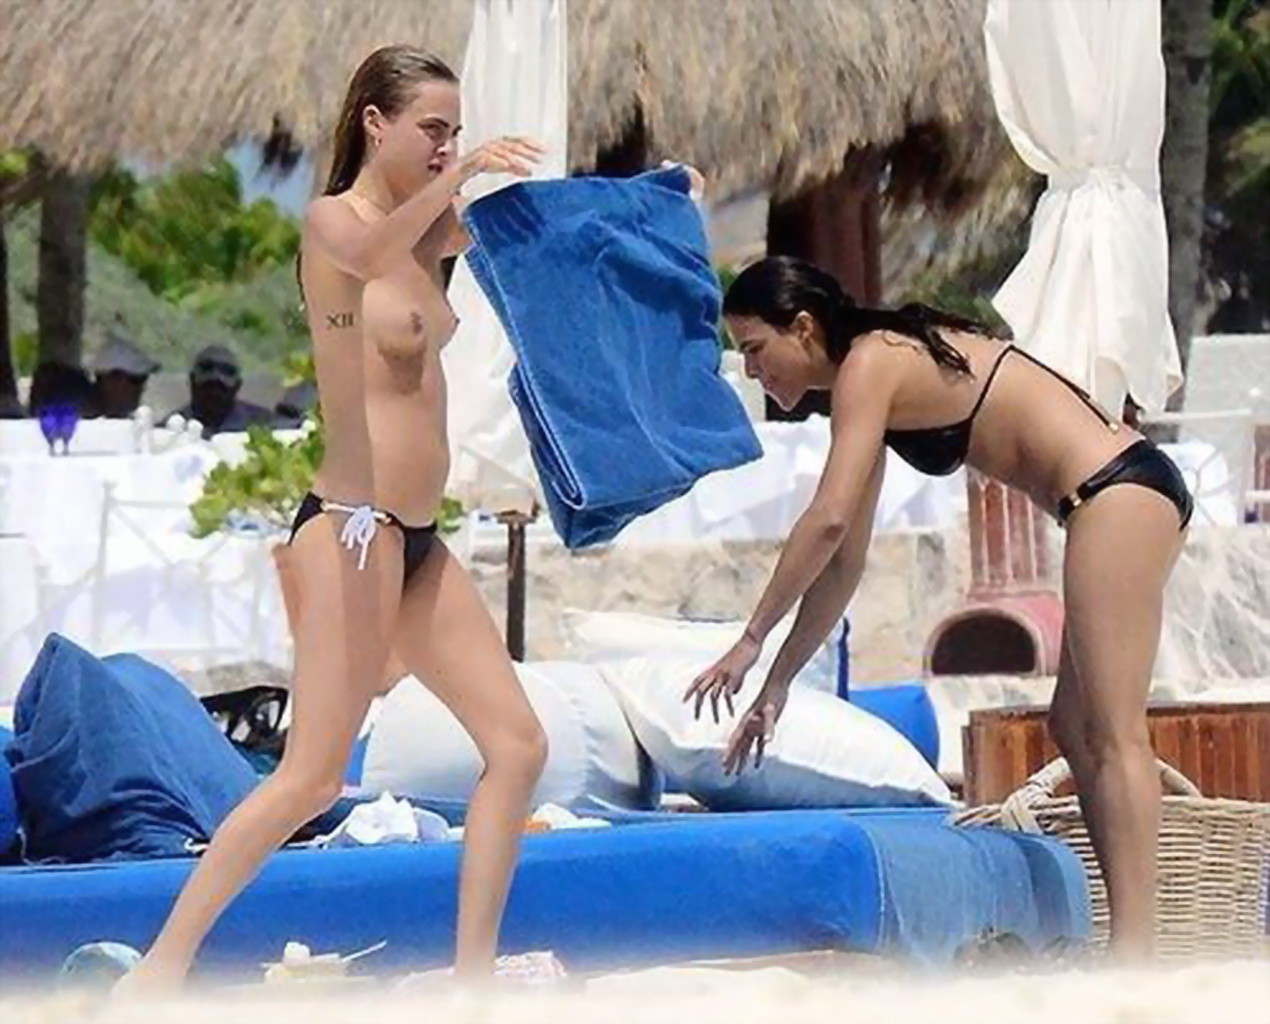 Michelle Rodriguez and Cara Delevingne cuddling and groping on the beach #75200976